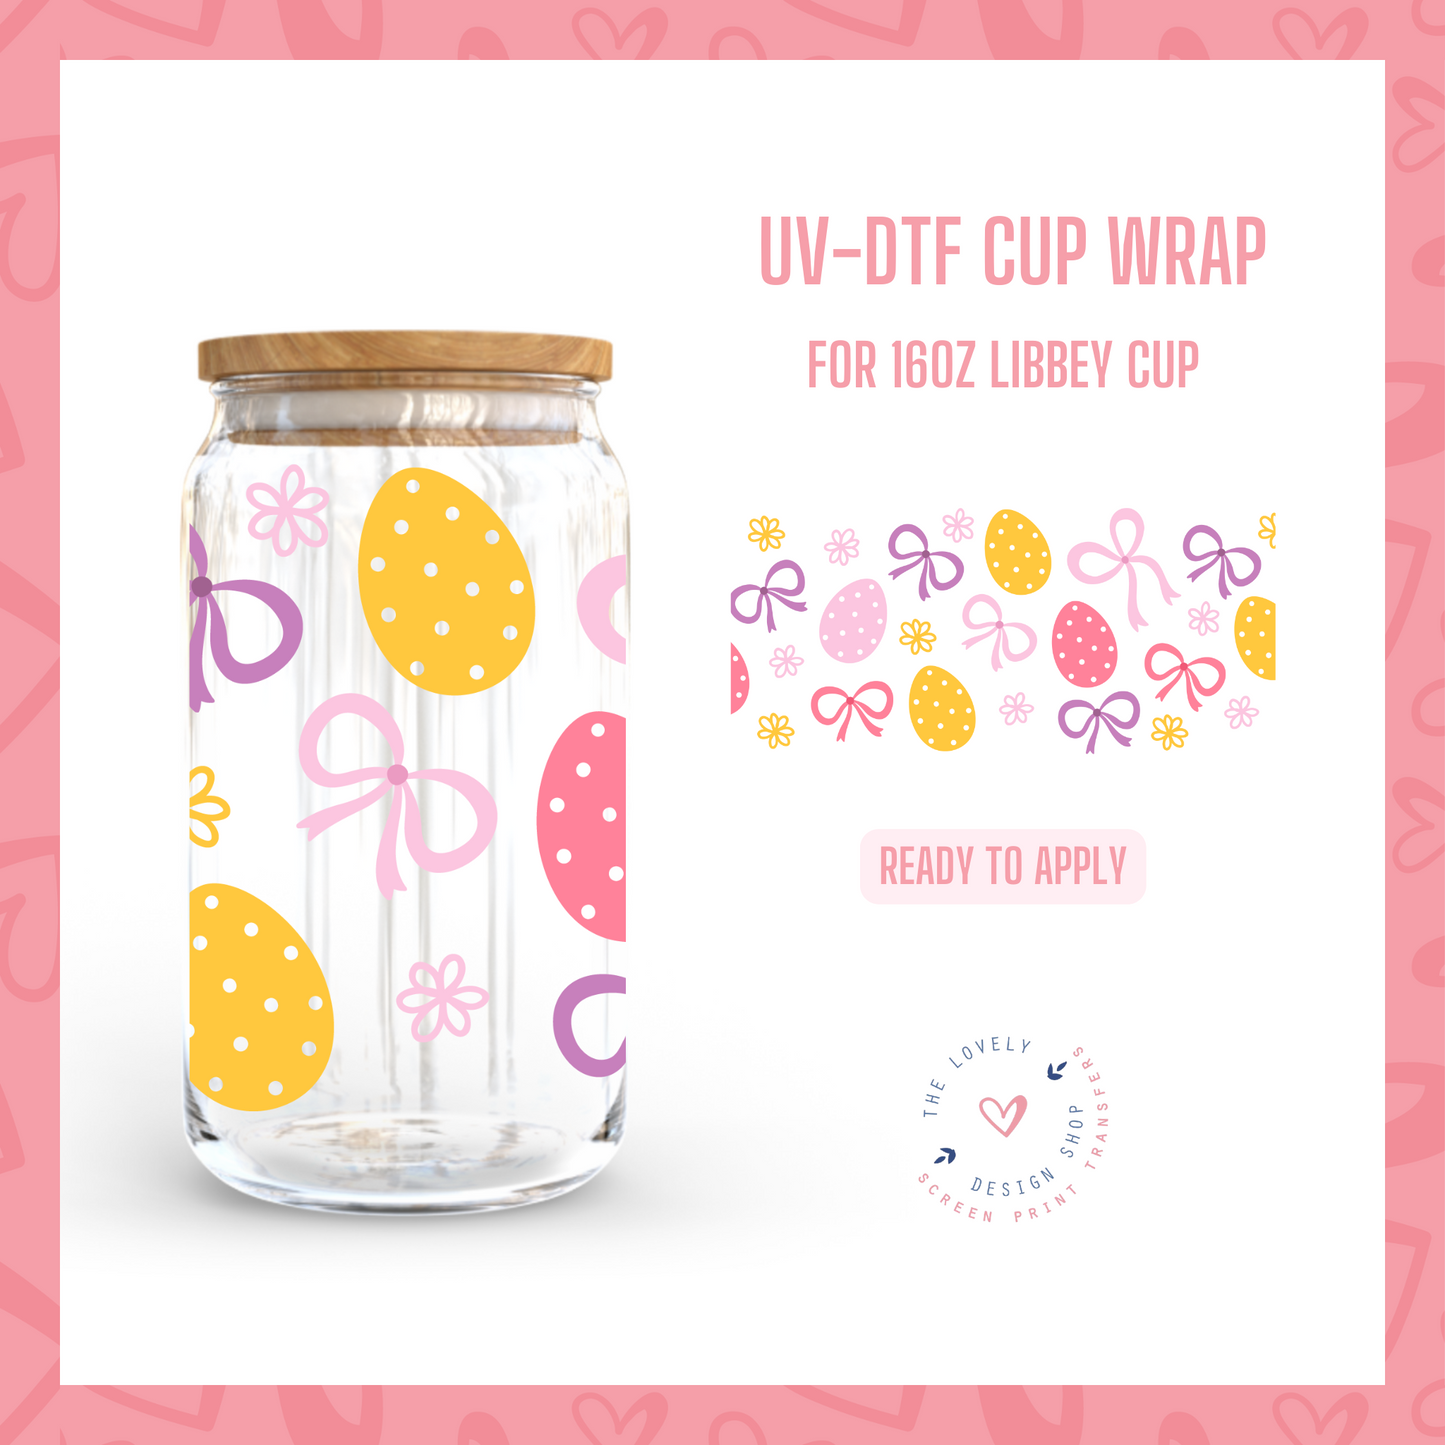 Easter Eggs & Bows - UV DTF 16 oz Libbey Cup Wrap (Ready to Ship) Mar 4